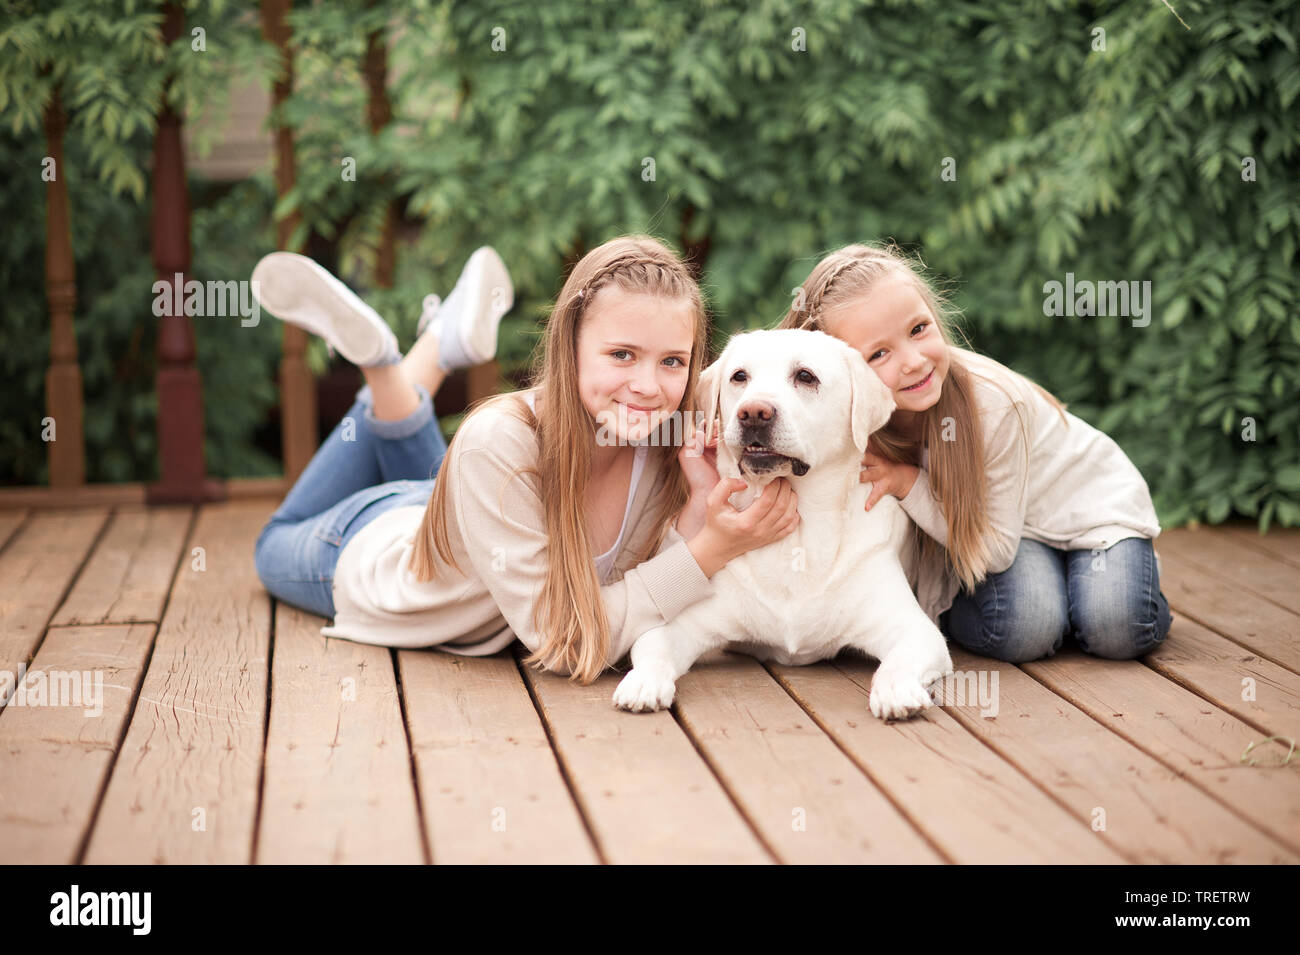 Happy girls having fun with pet labrador outdoors. Lying on wooden floor. Looking at camera. Happiness. Togetherness. Stock Photo